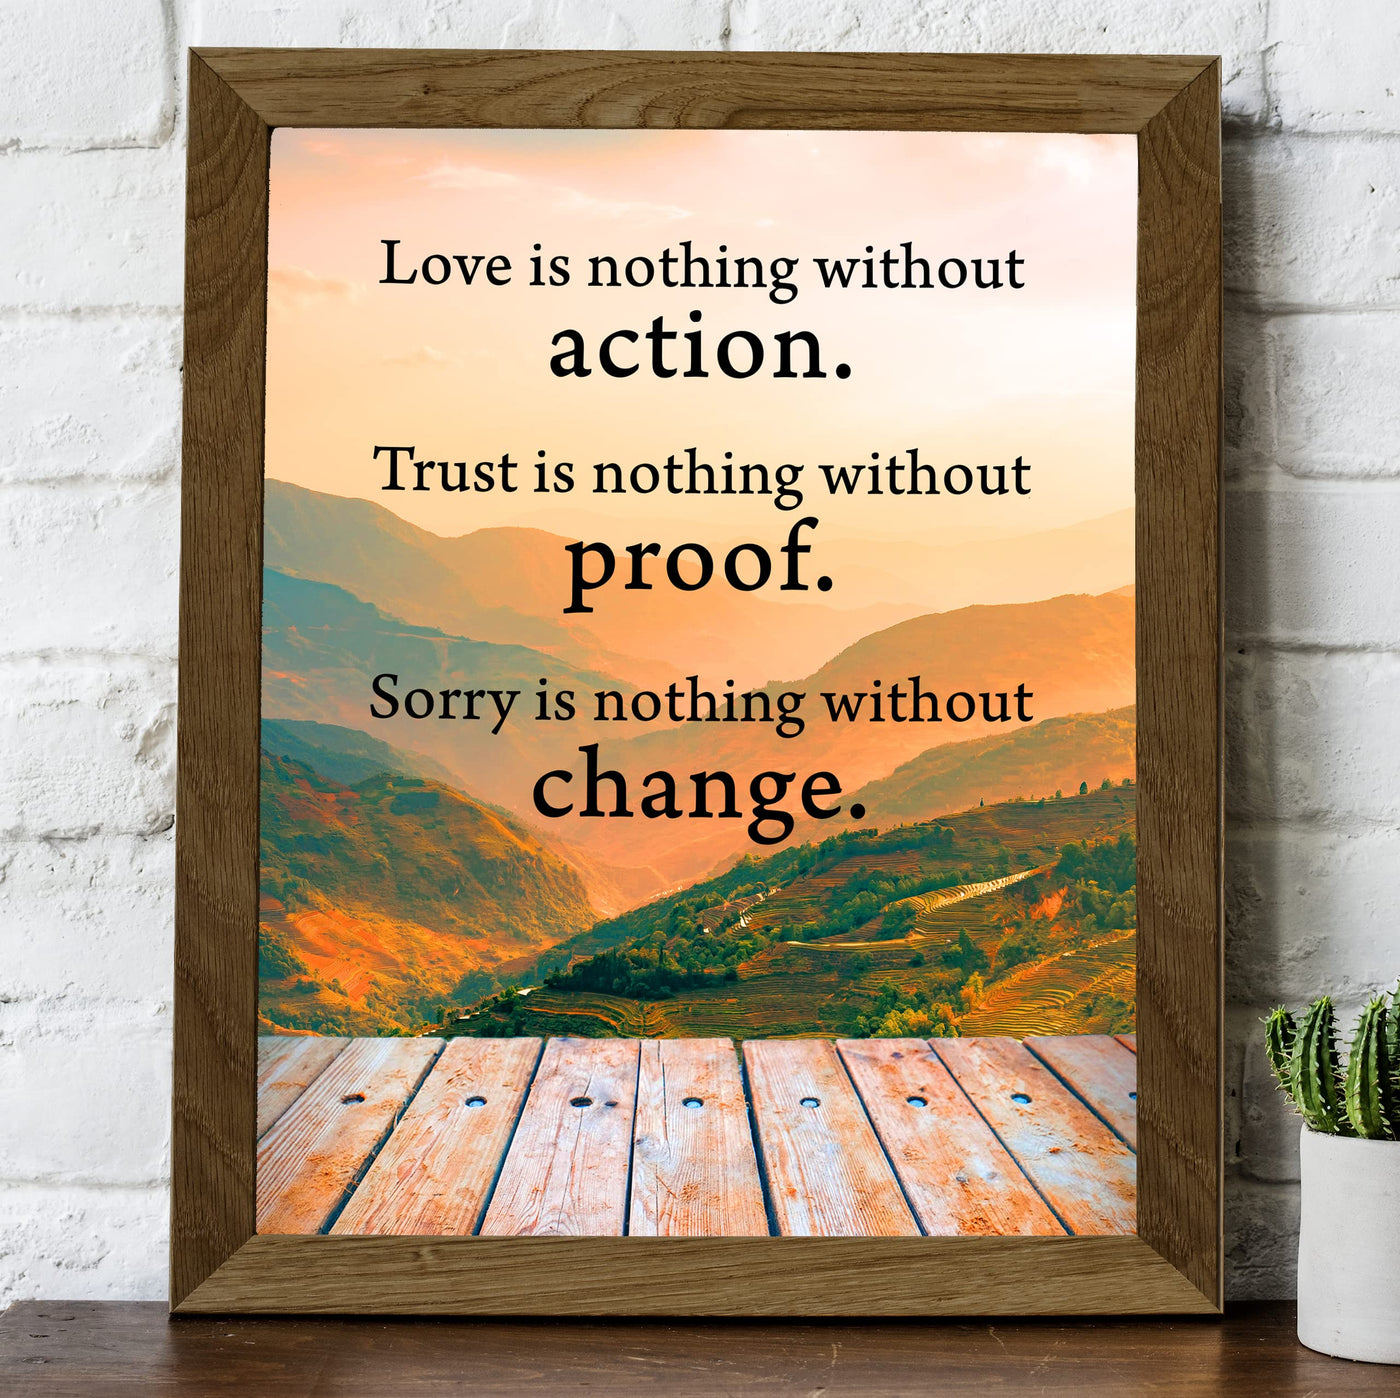 Love Is Nothing Without Action-Inspirational Life Quotes Wall Art -8x10" Mountain Sunset Photo Print-Ready to Frame. Motivational Home-Office-Cabin-Lodge Decor. Great Reminder-Gift for Inspiration!